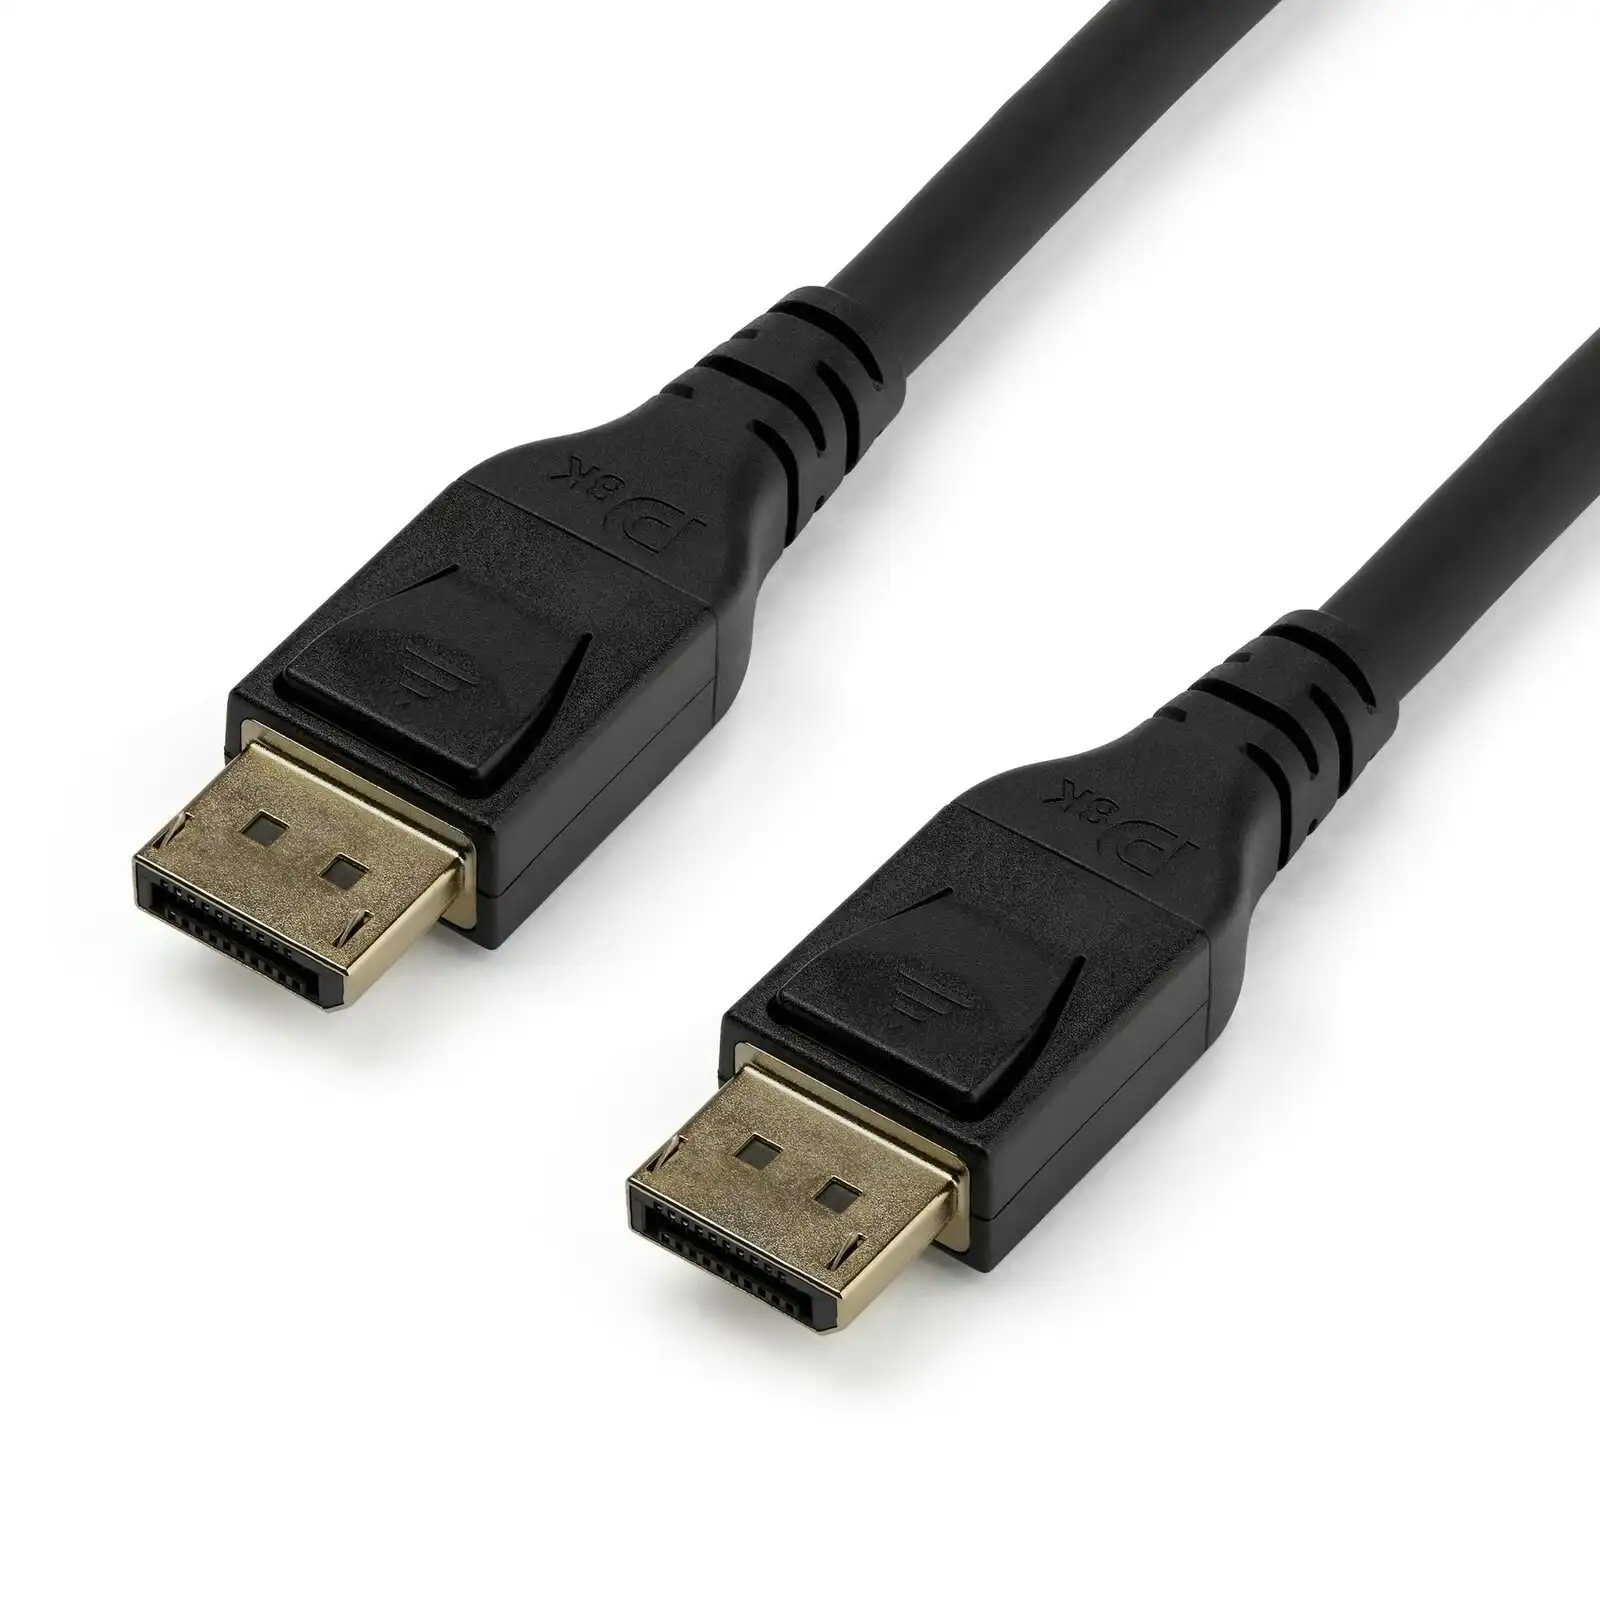 Star Tech DisplayPort Cable Black 3m HBR3 HDR MST 8K 120Hz 32.4Gbps Male To Male